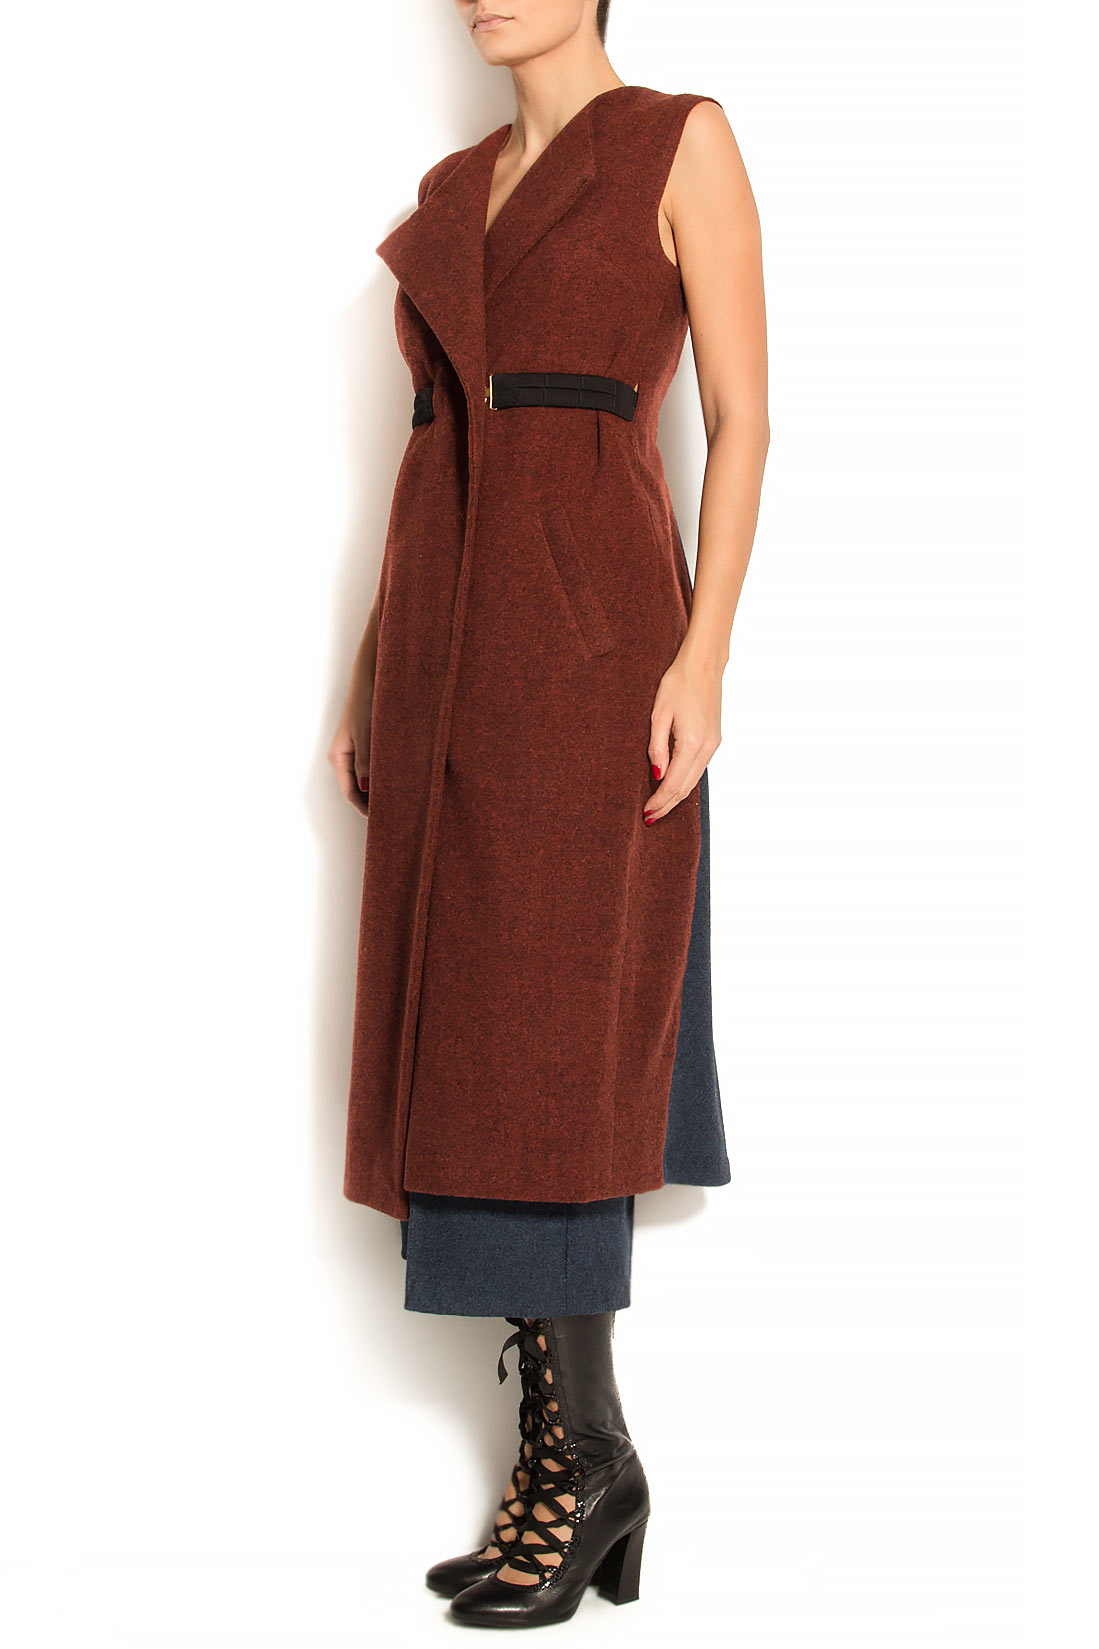 Boiled wool gilet style dress ATU Body Couture image 1